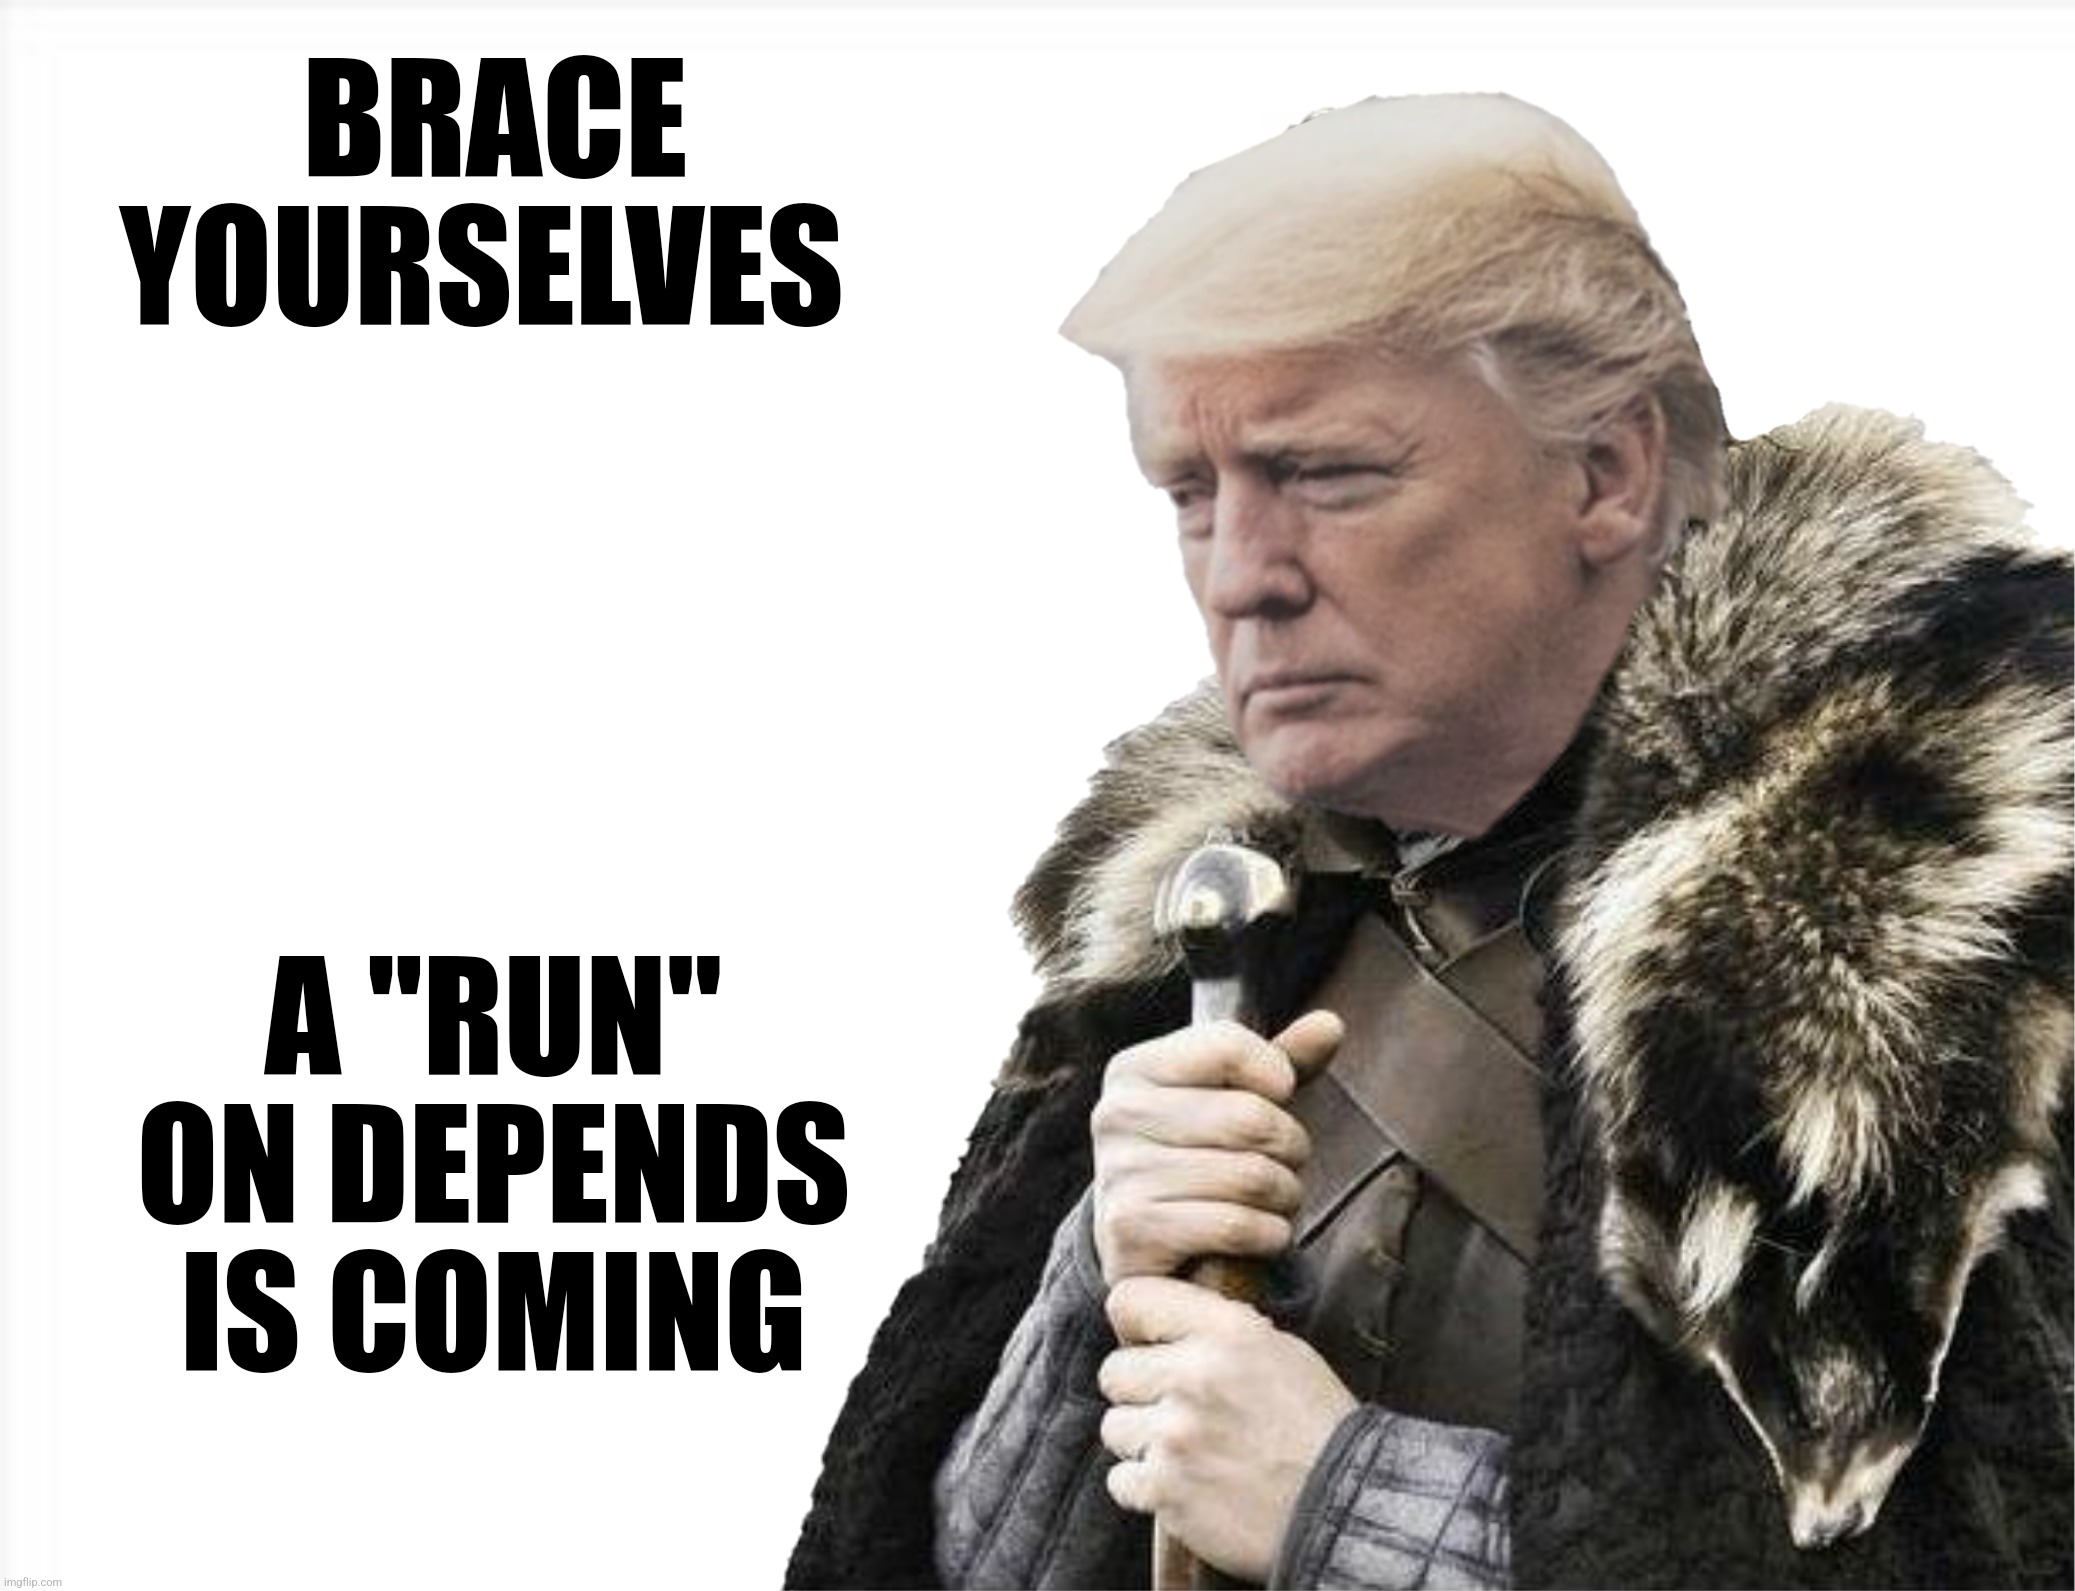 BRACE YOURSELVES A "RUN" ON DEPENDS IS COMING | made w/ Imgflip meme maker